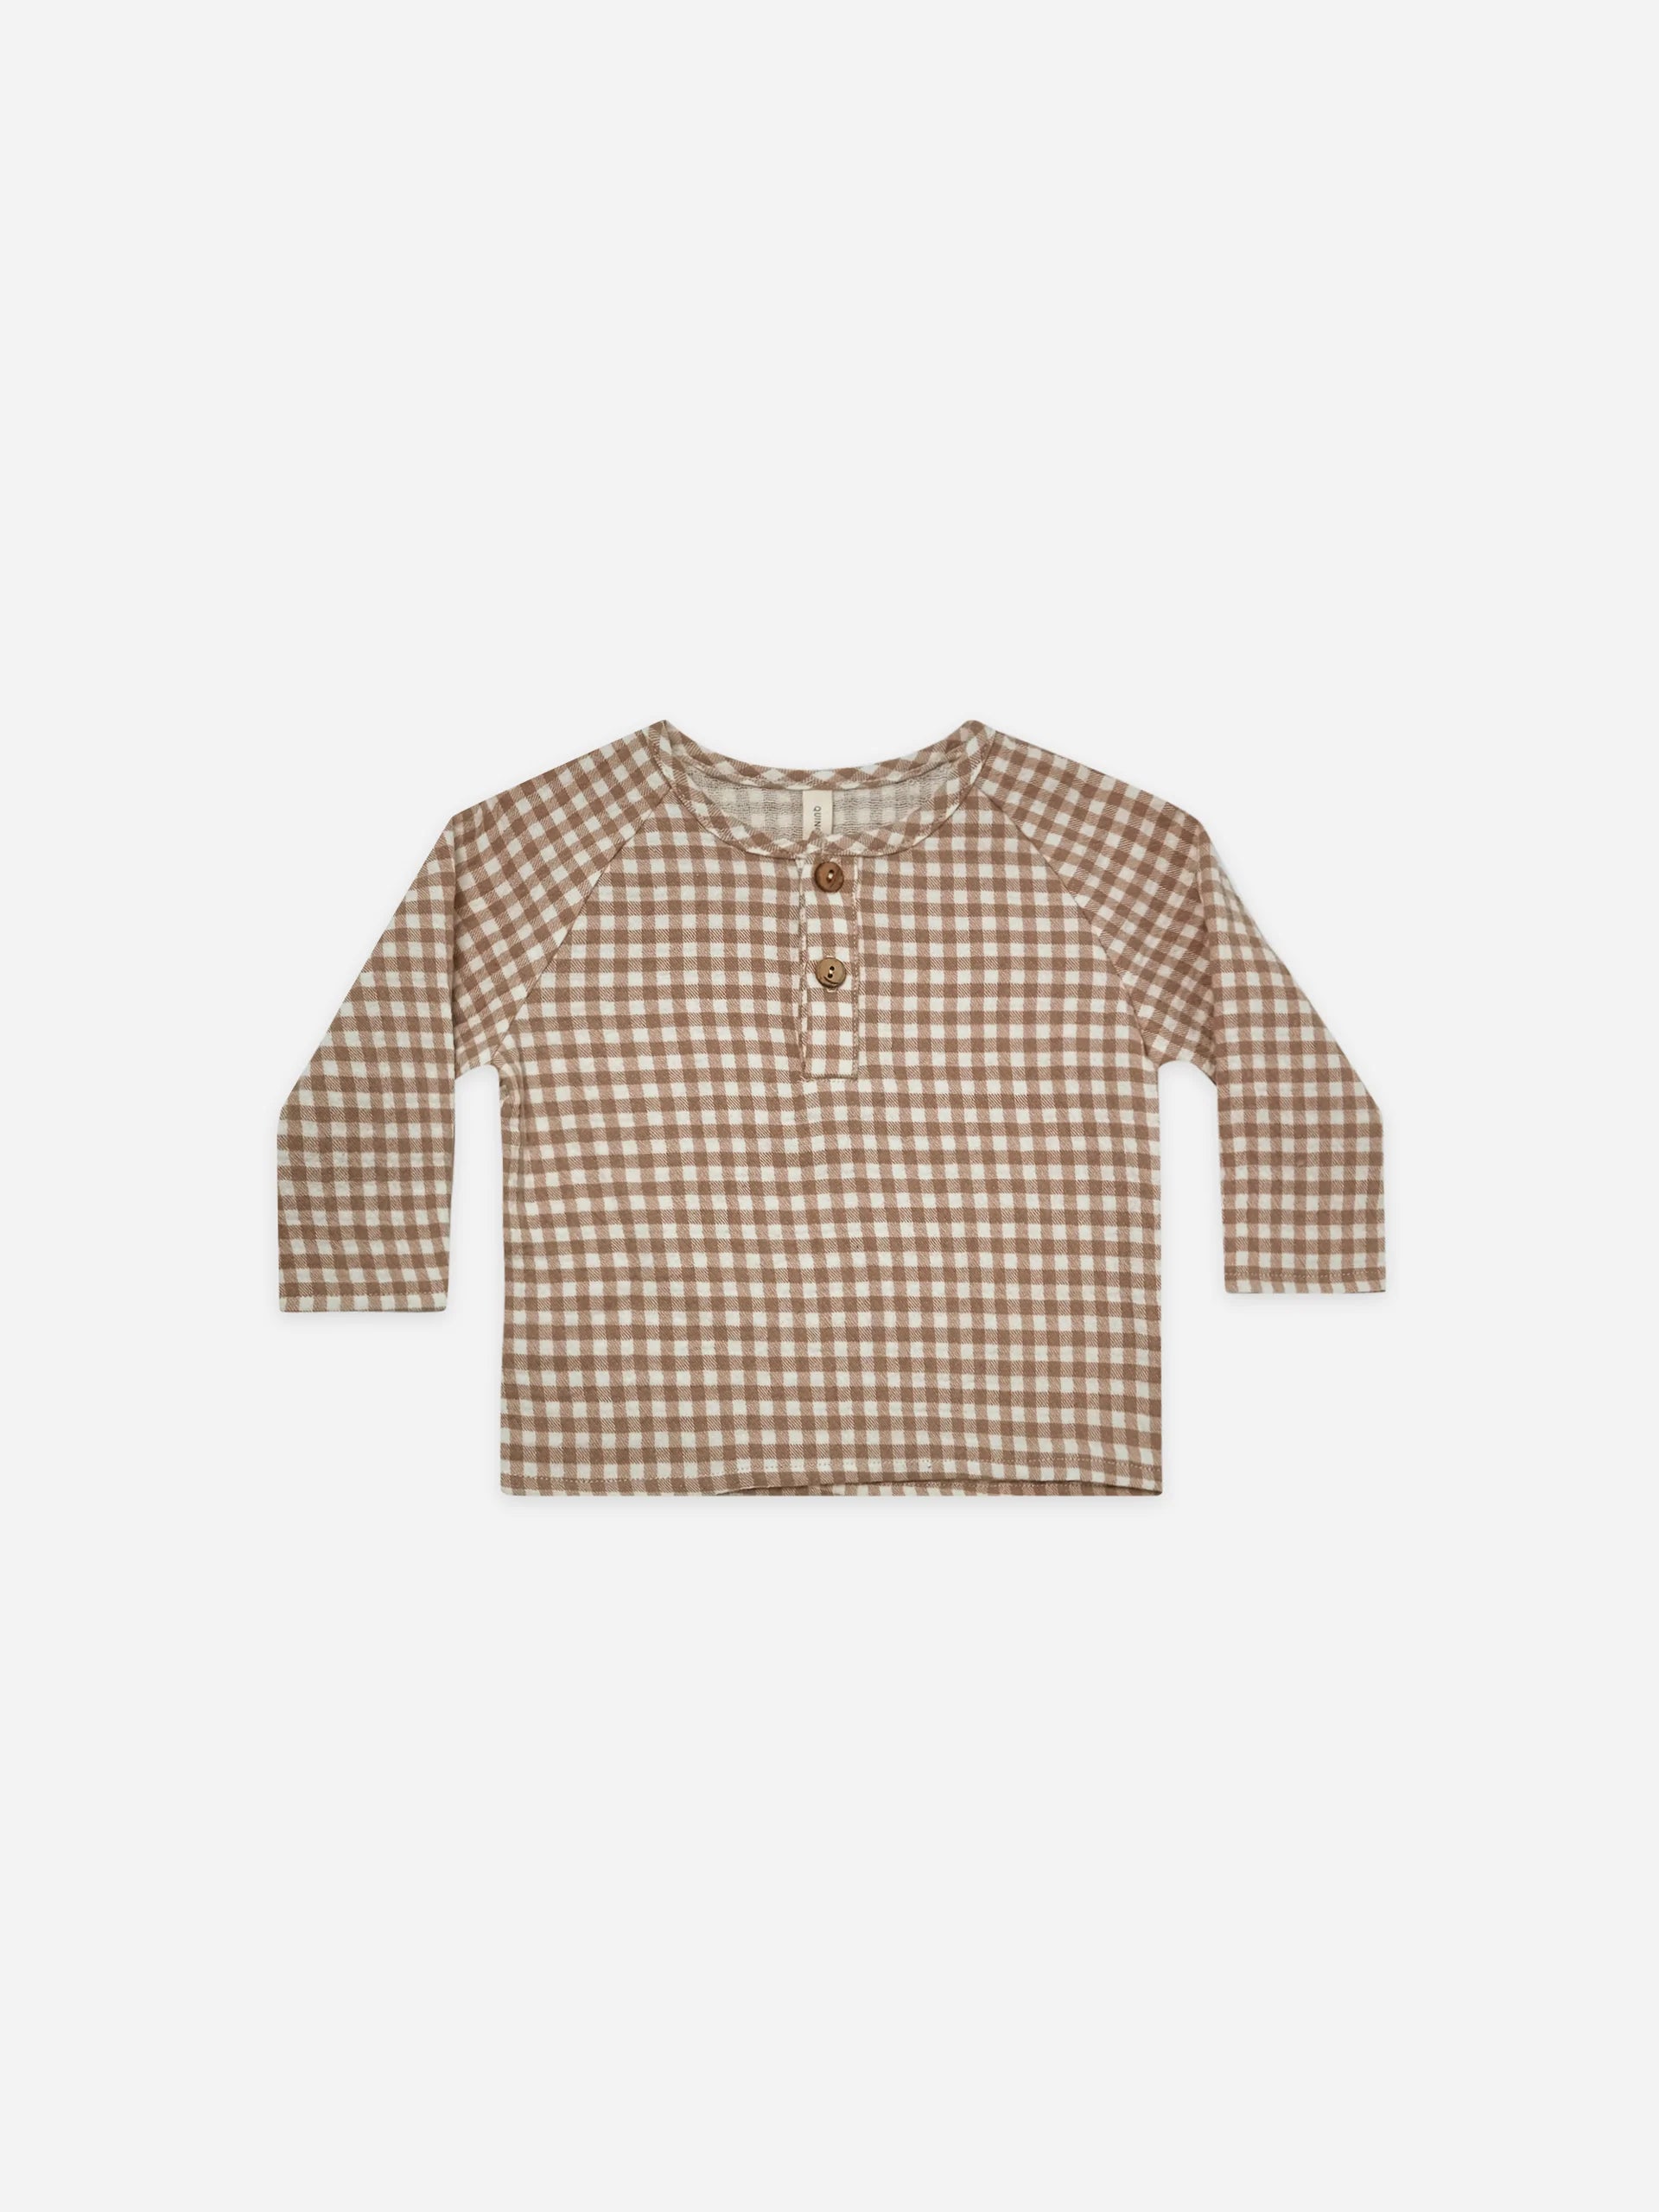 Zion Shirt - Cocoa Gingham